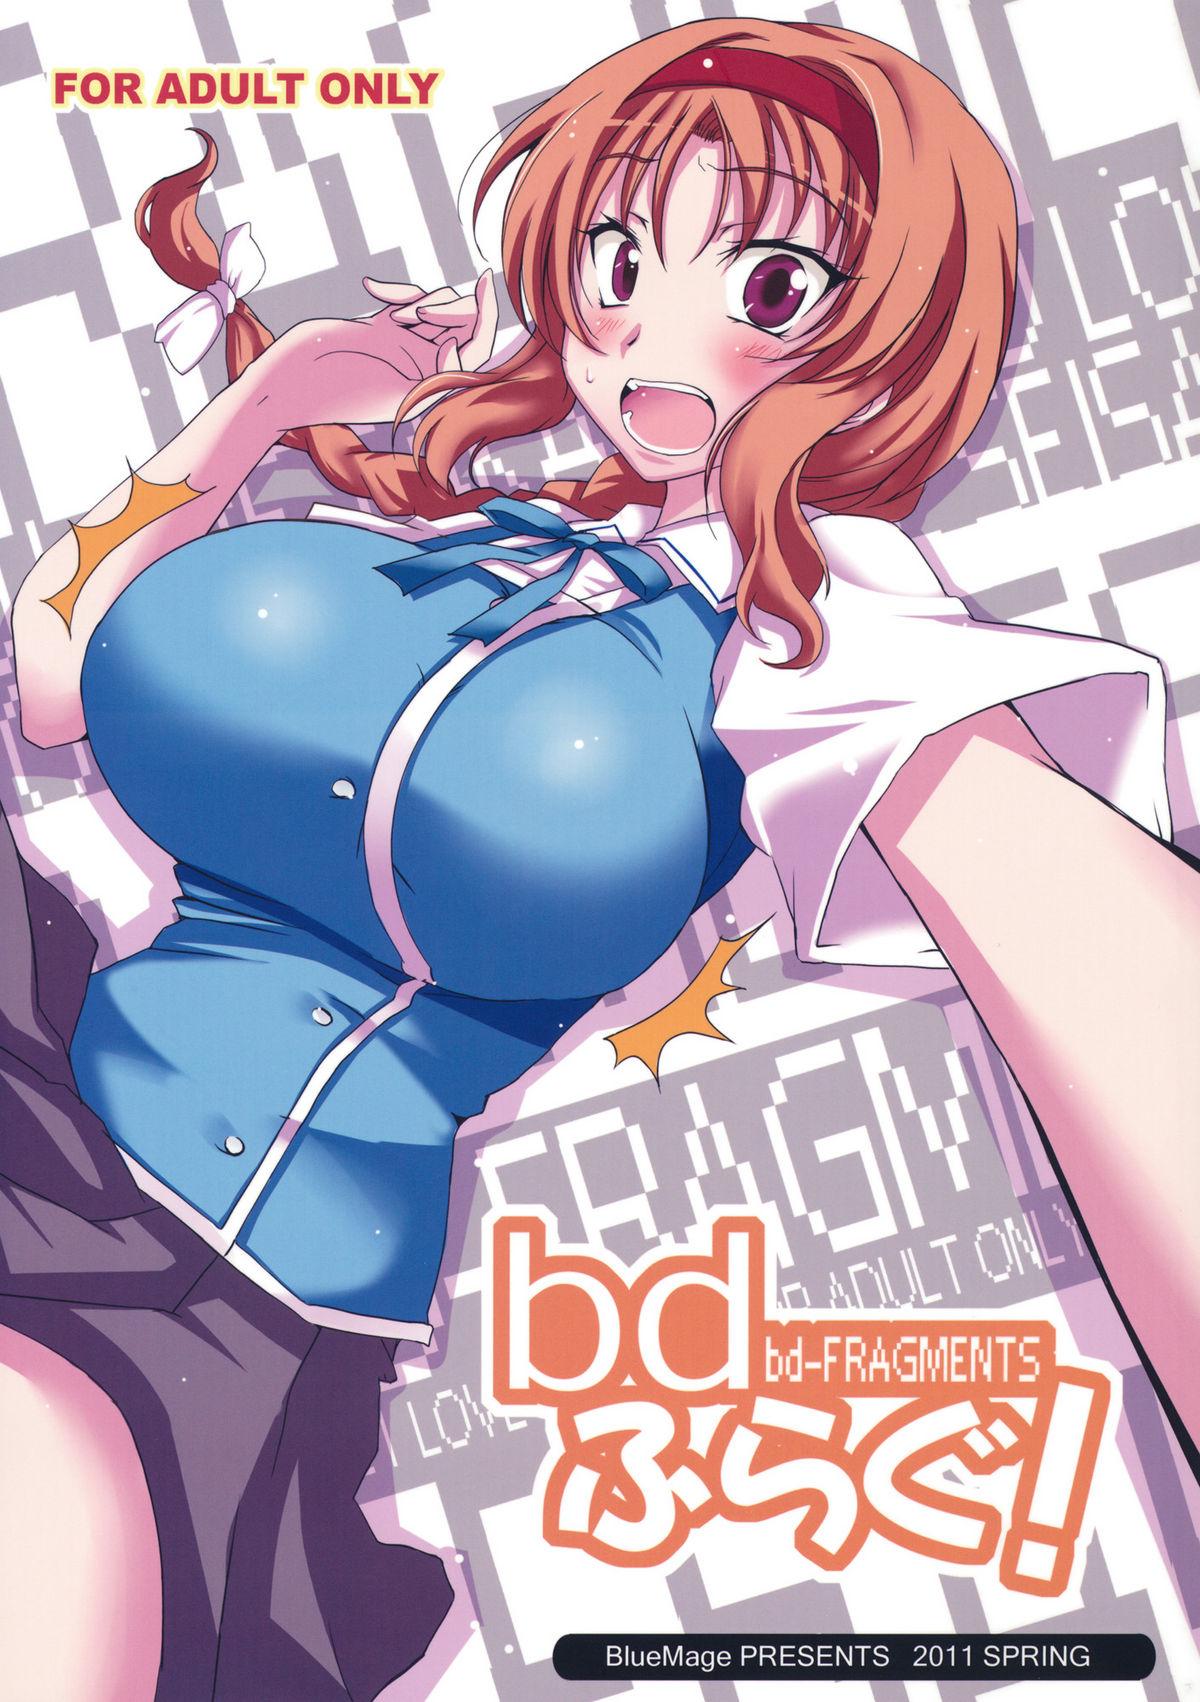 Hot bd-FRAGMENTS! - D-frag Caught - Page 1